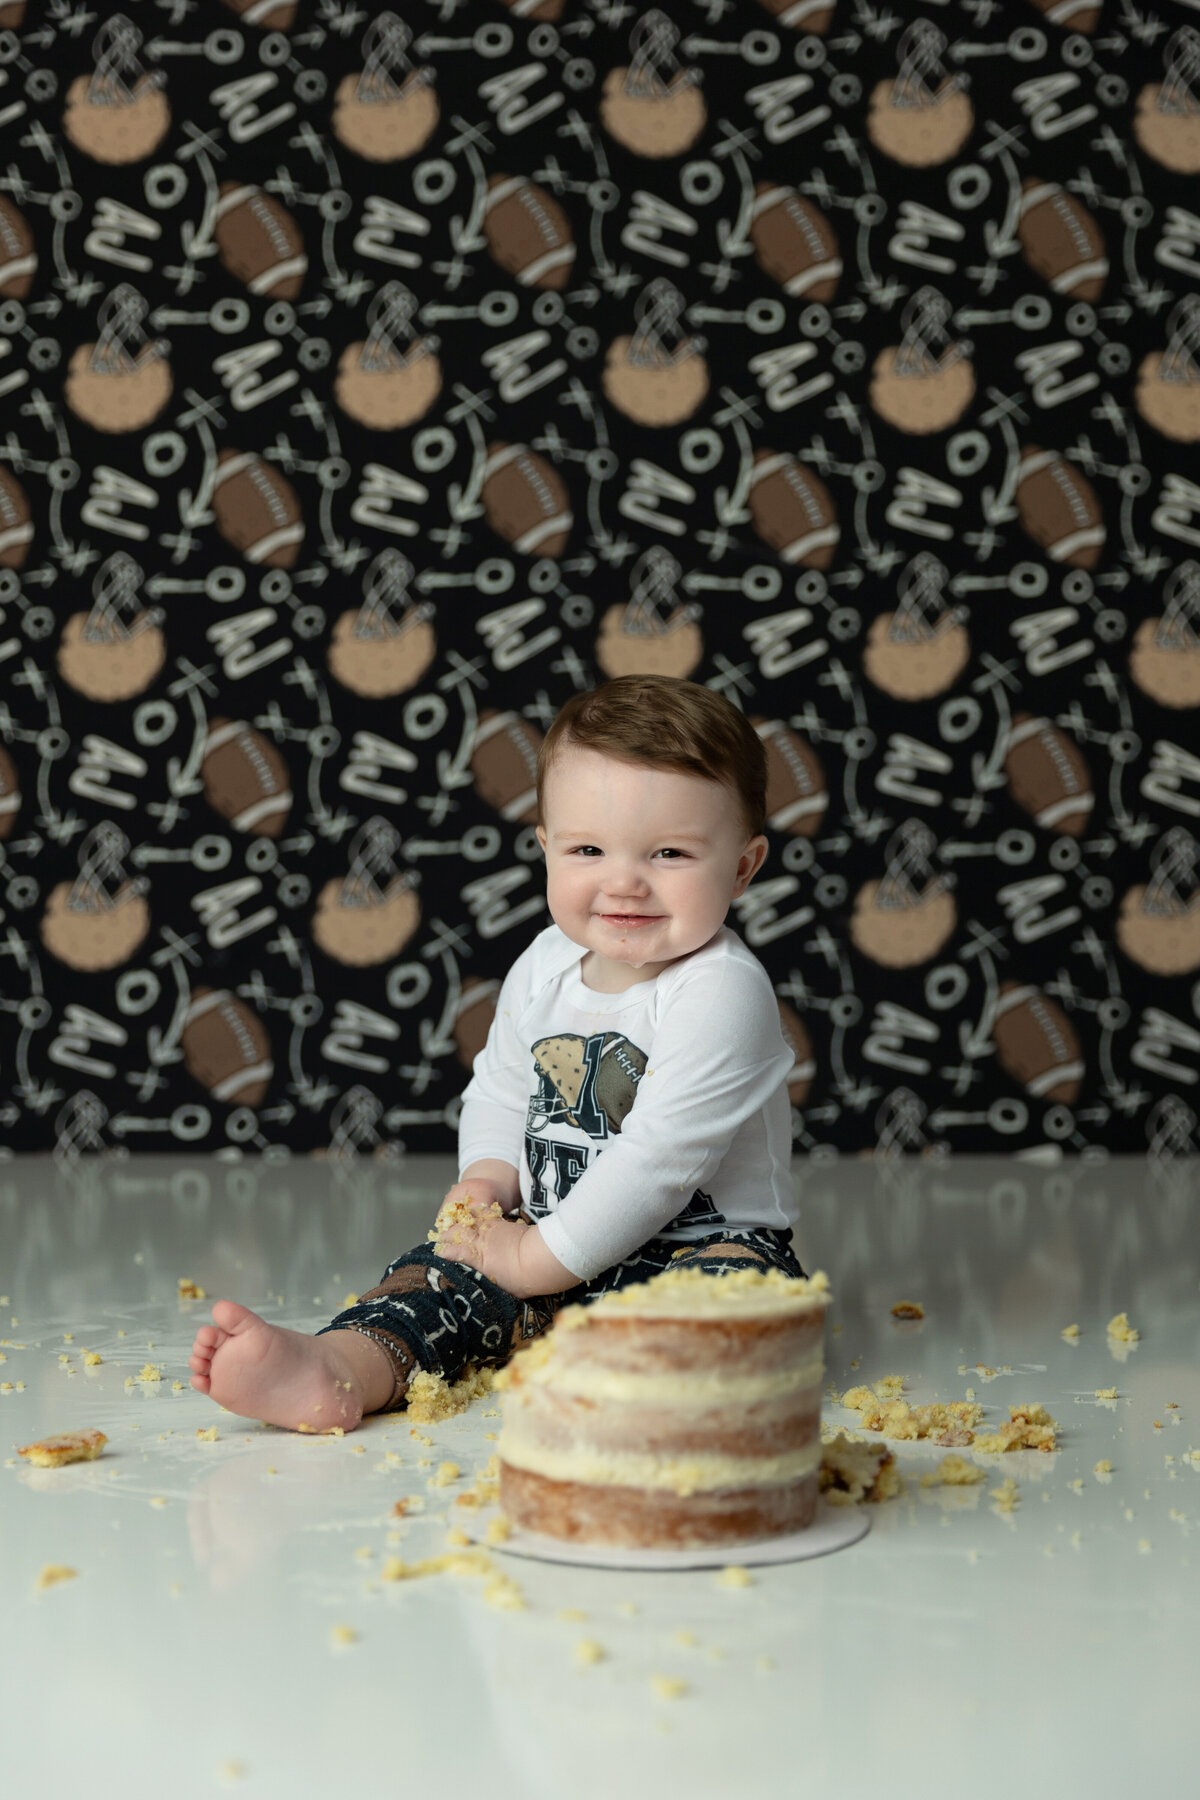 A happy toddler boy smiles while sitting on a studio floor surrounded by cake